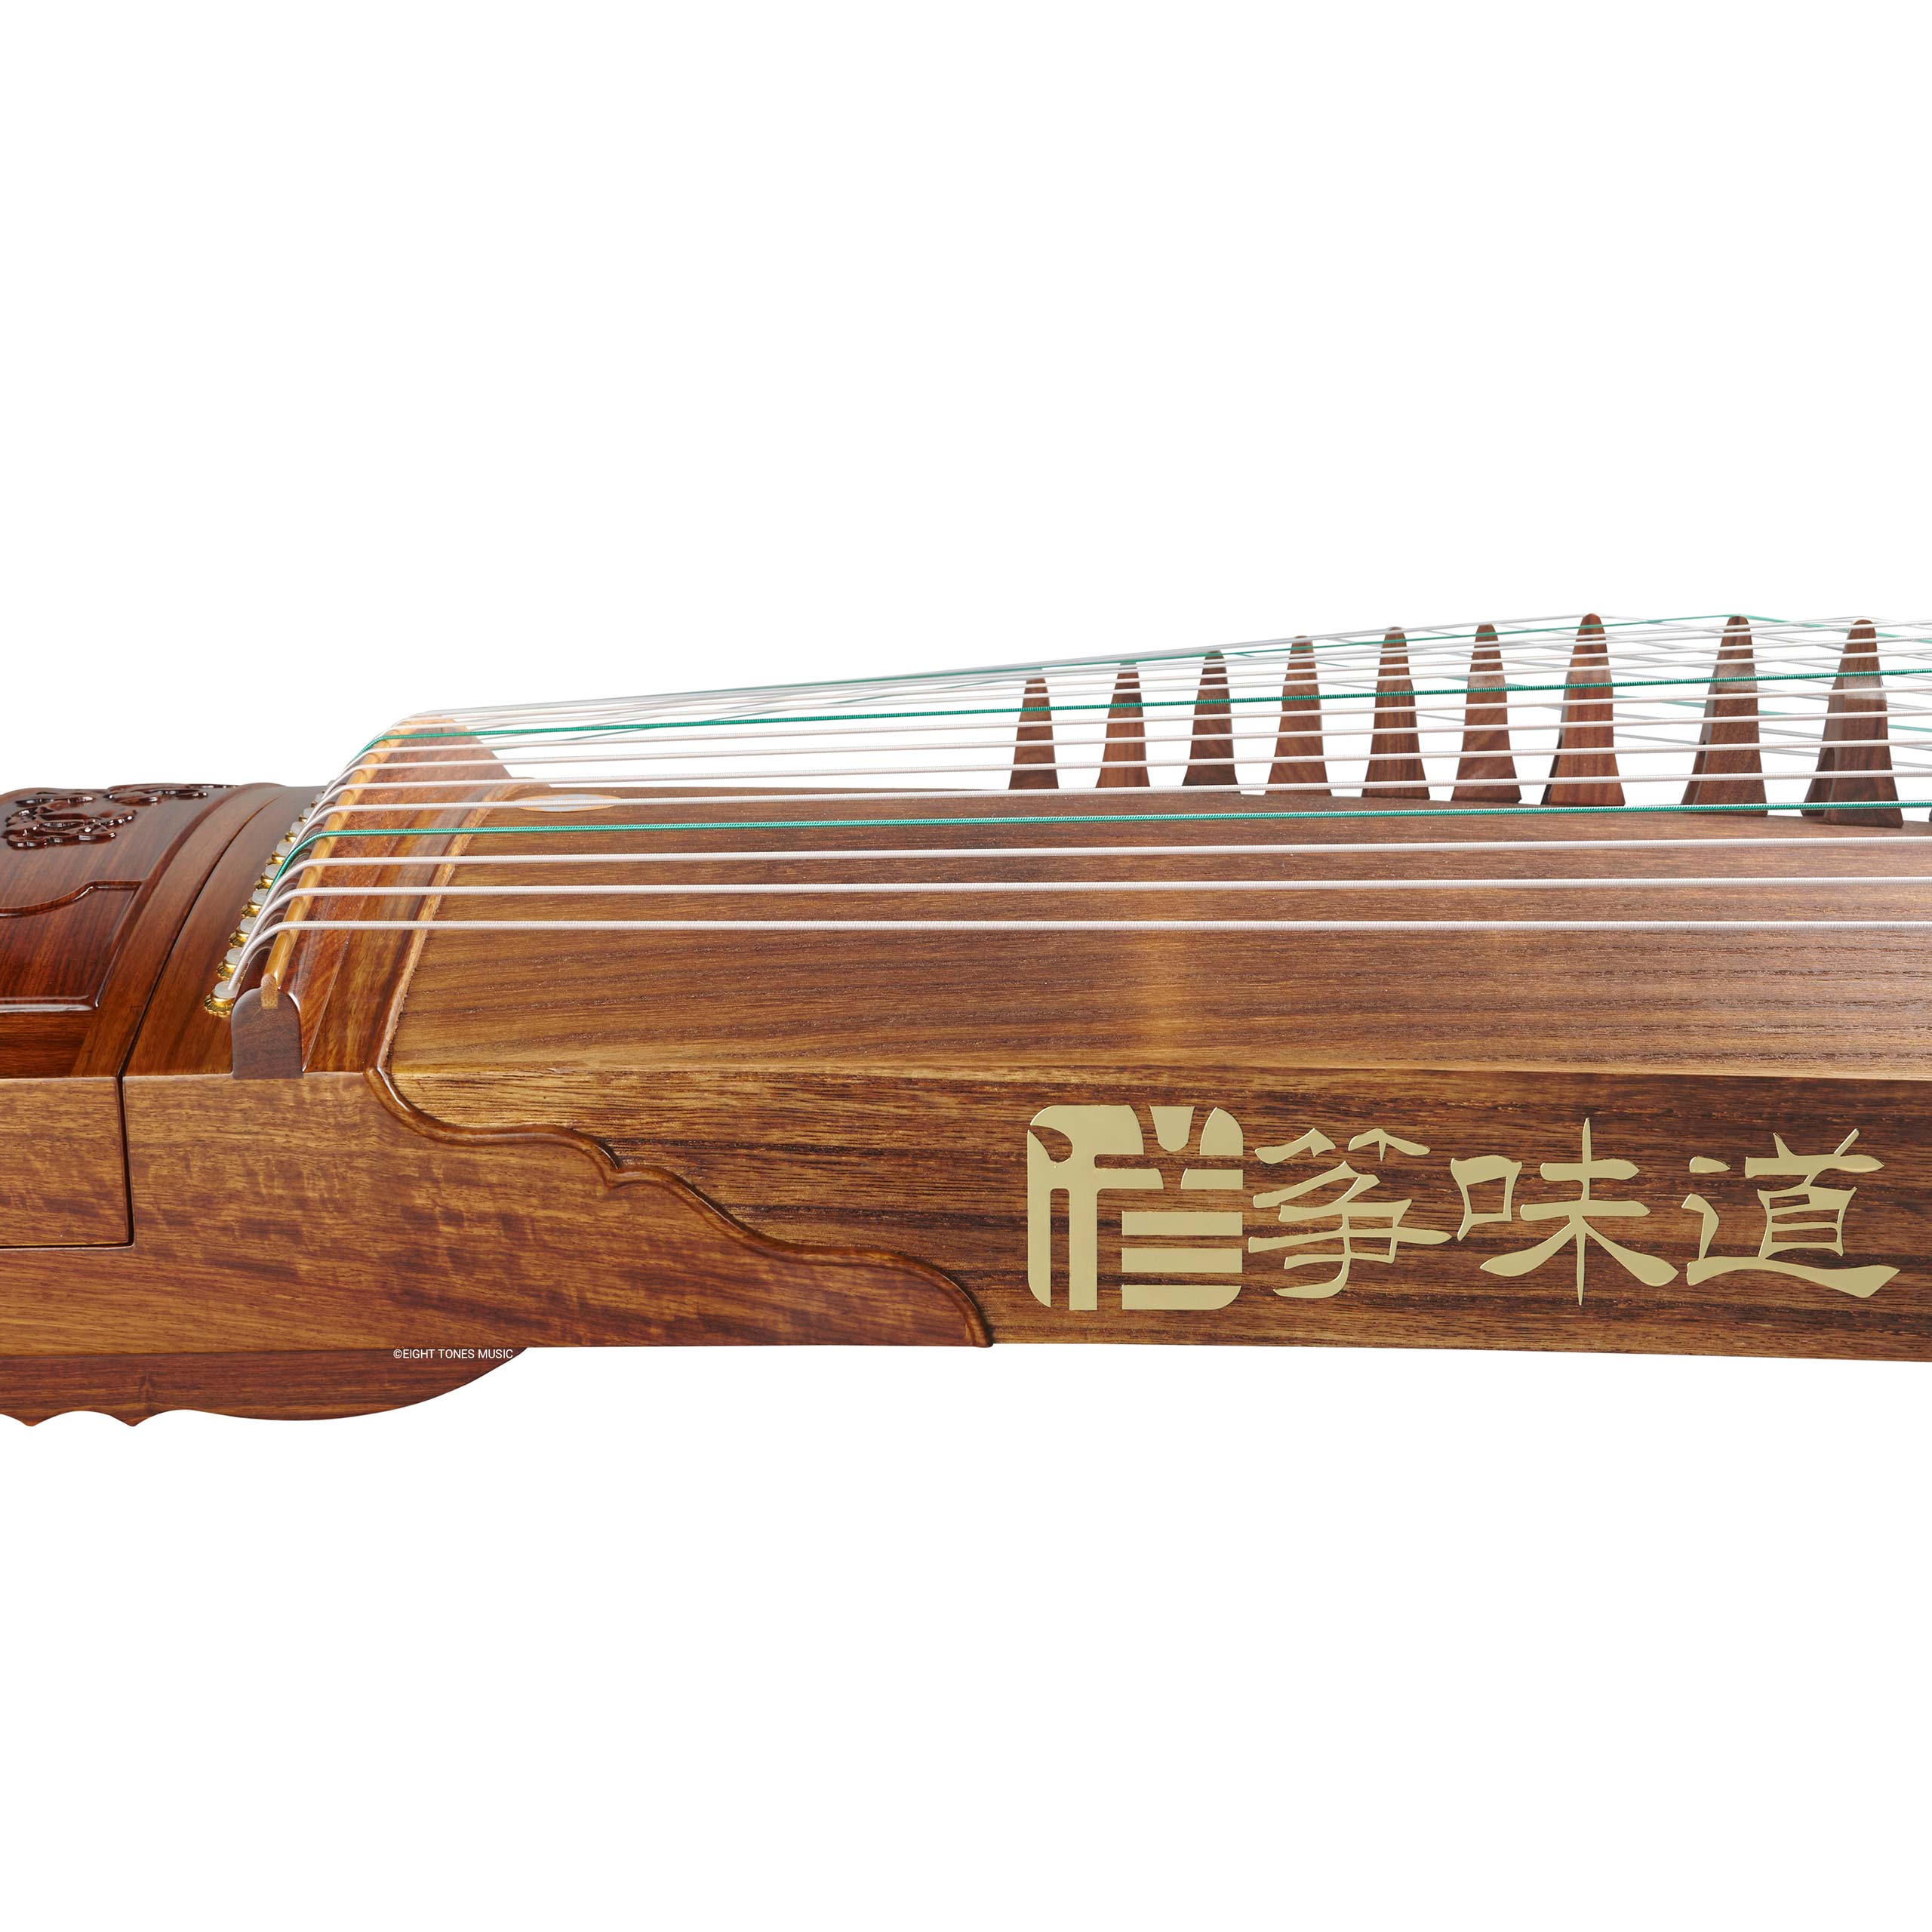 Zhonghao Spring's Breeze Guzheng Sideboard with brand